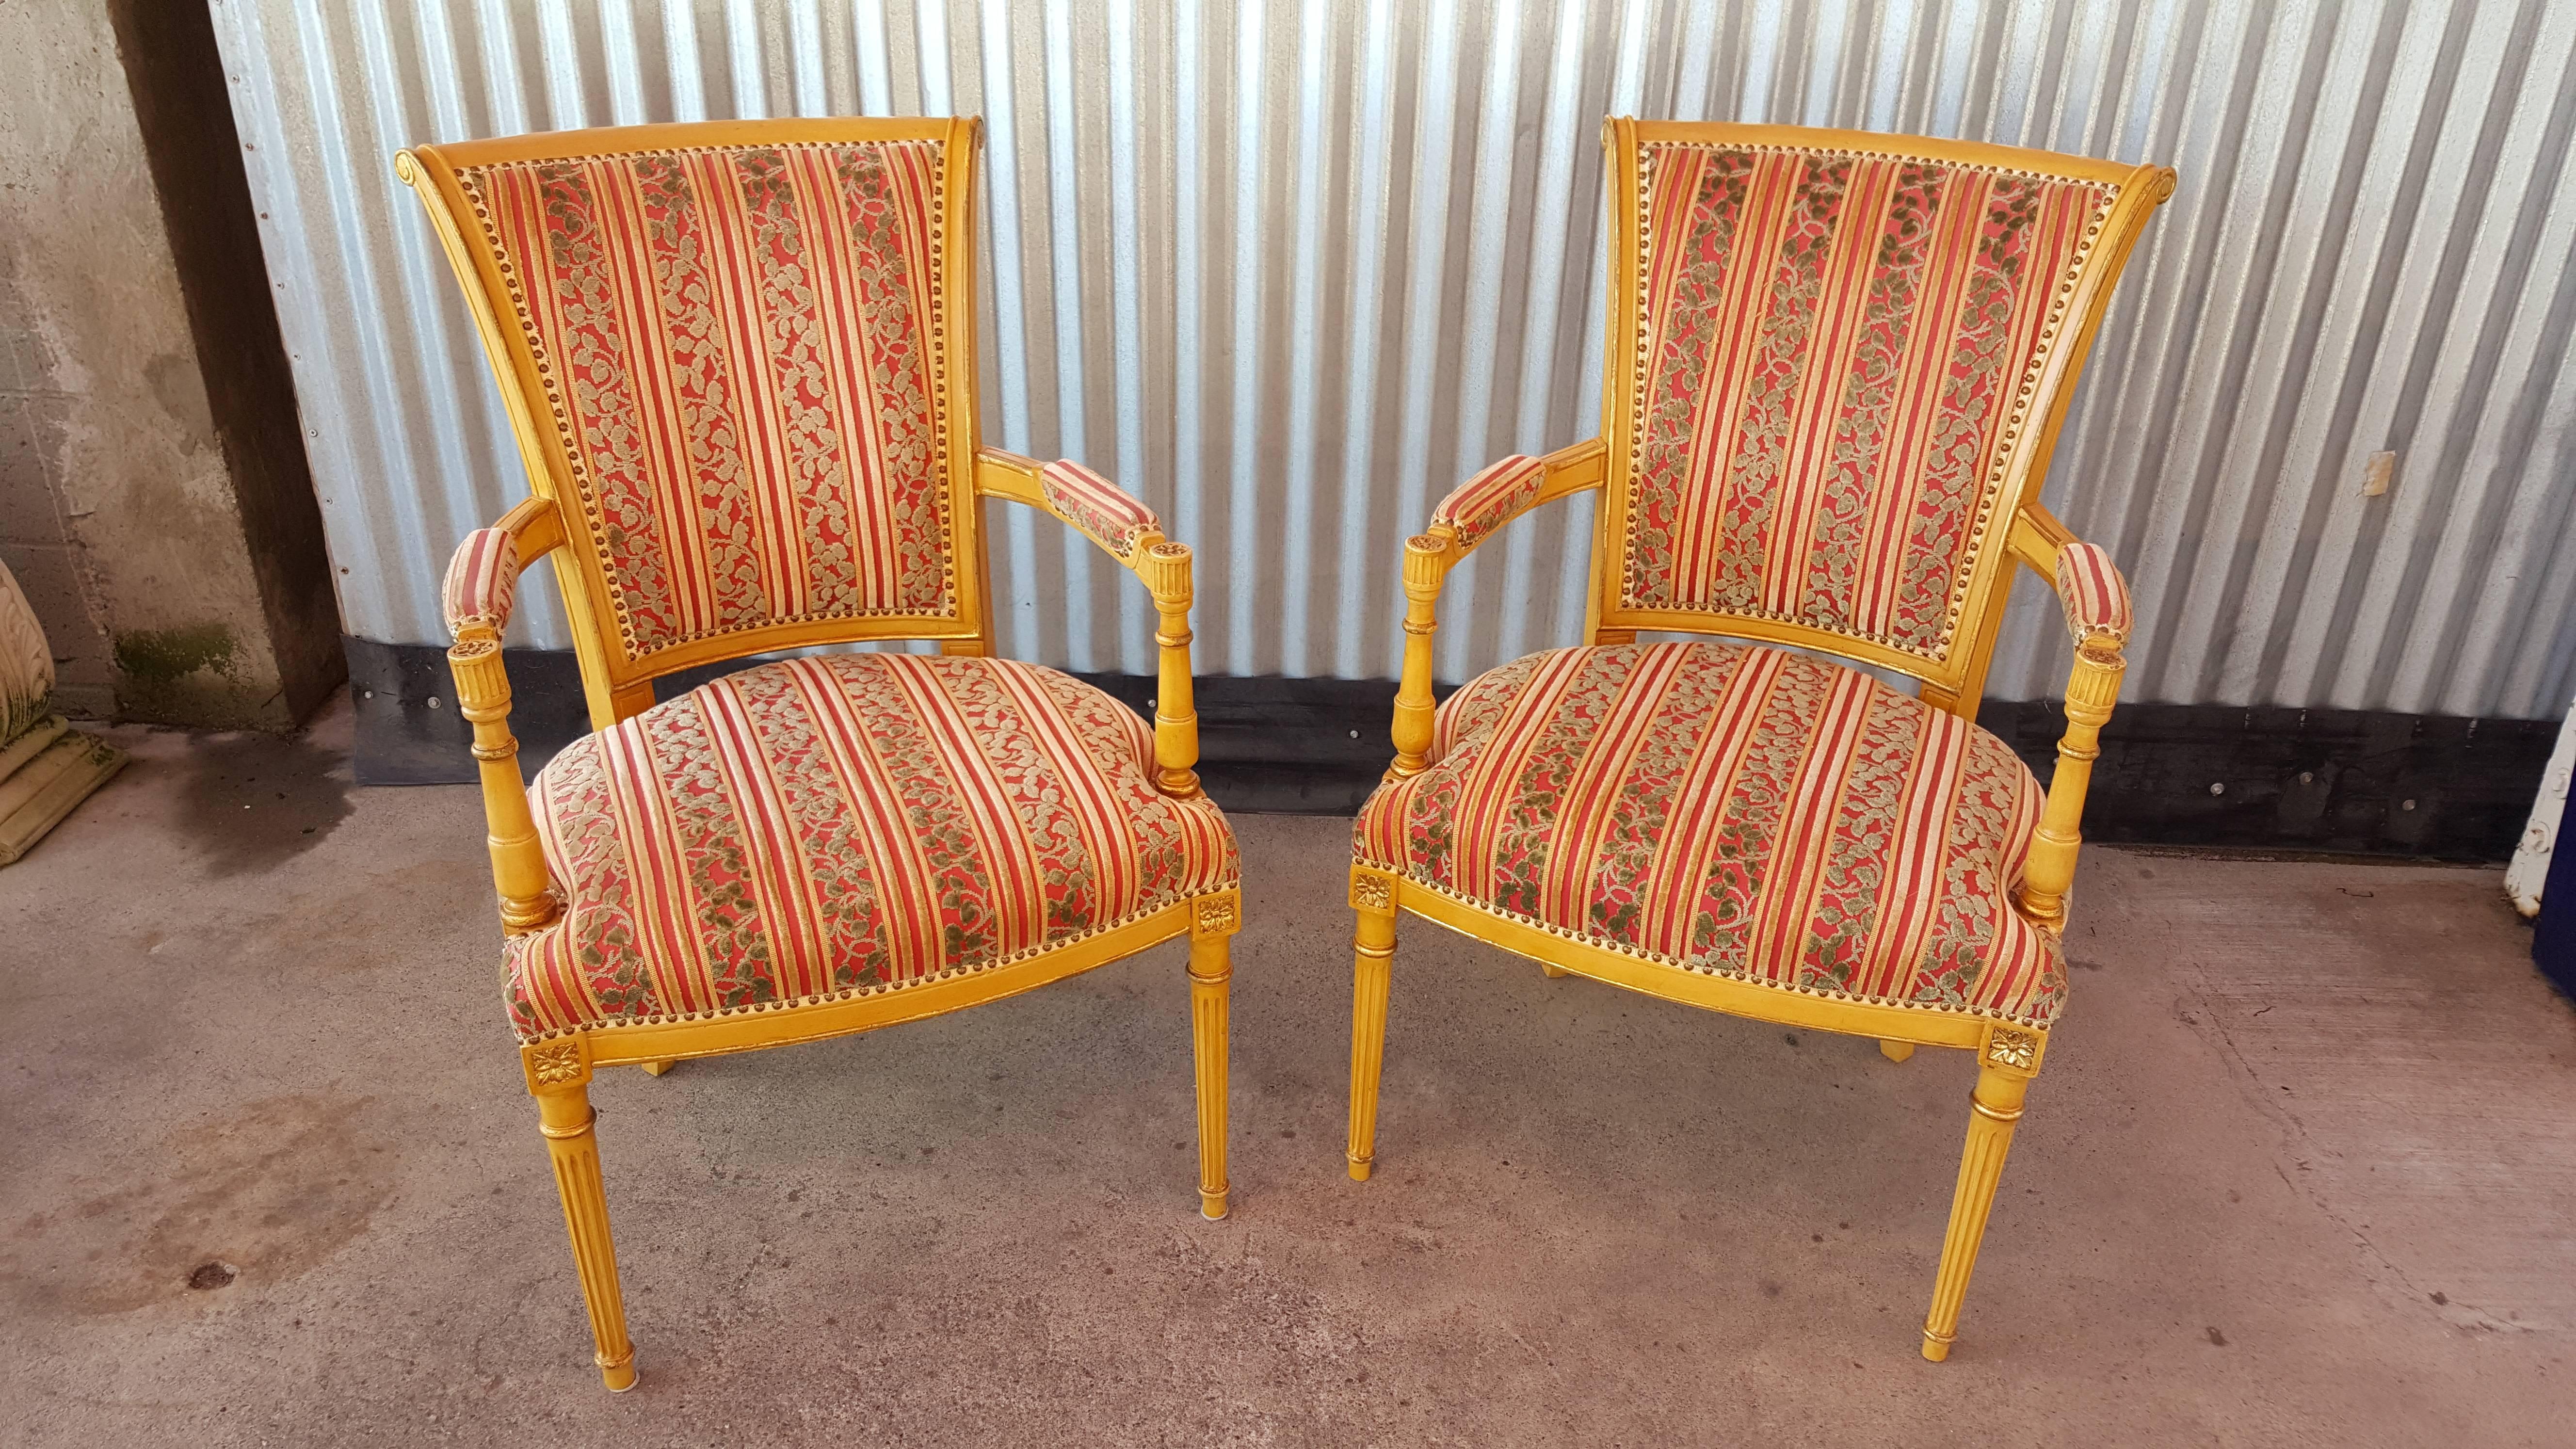 A beautiful pair of Louis XVI style armchairs with fine attention to detail. Original painted surface and fabric. Retaining the Lx Rossi label. Late 20th century.